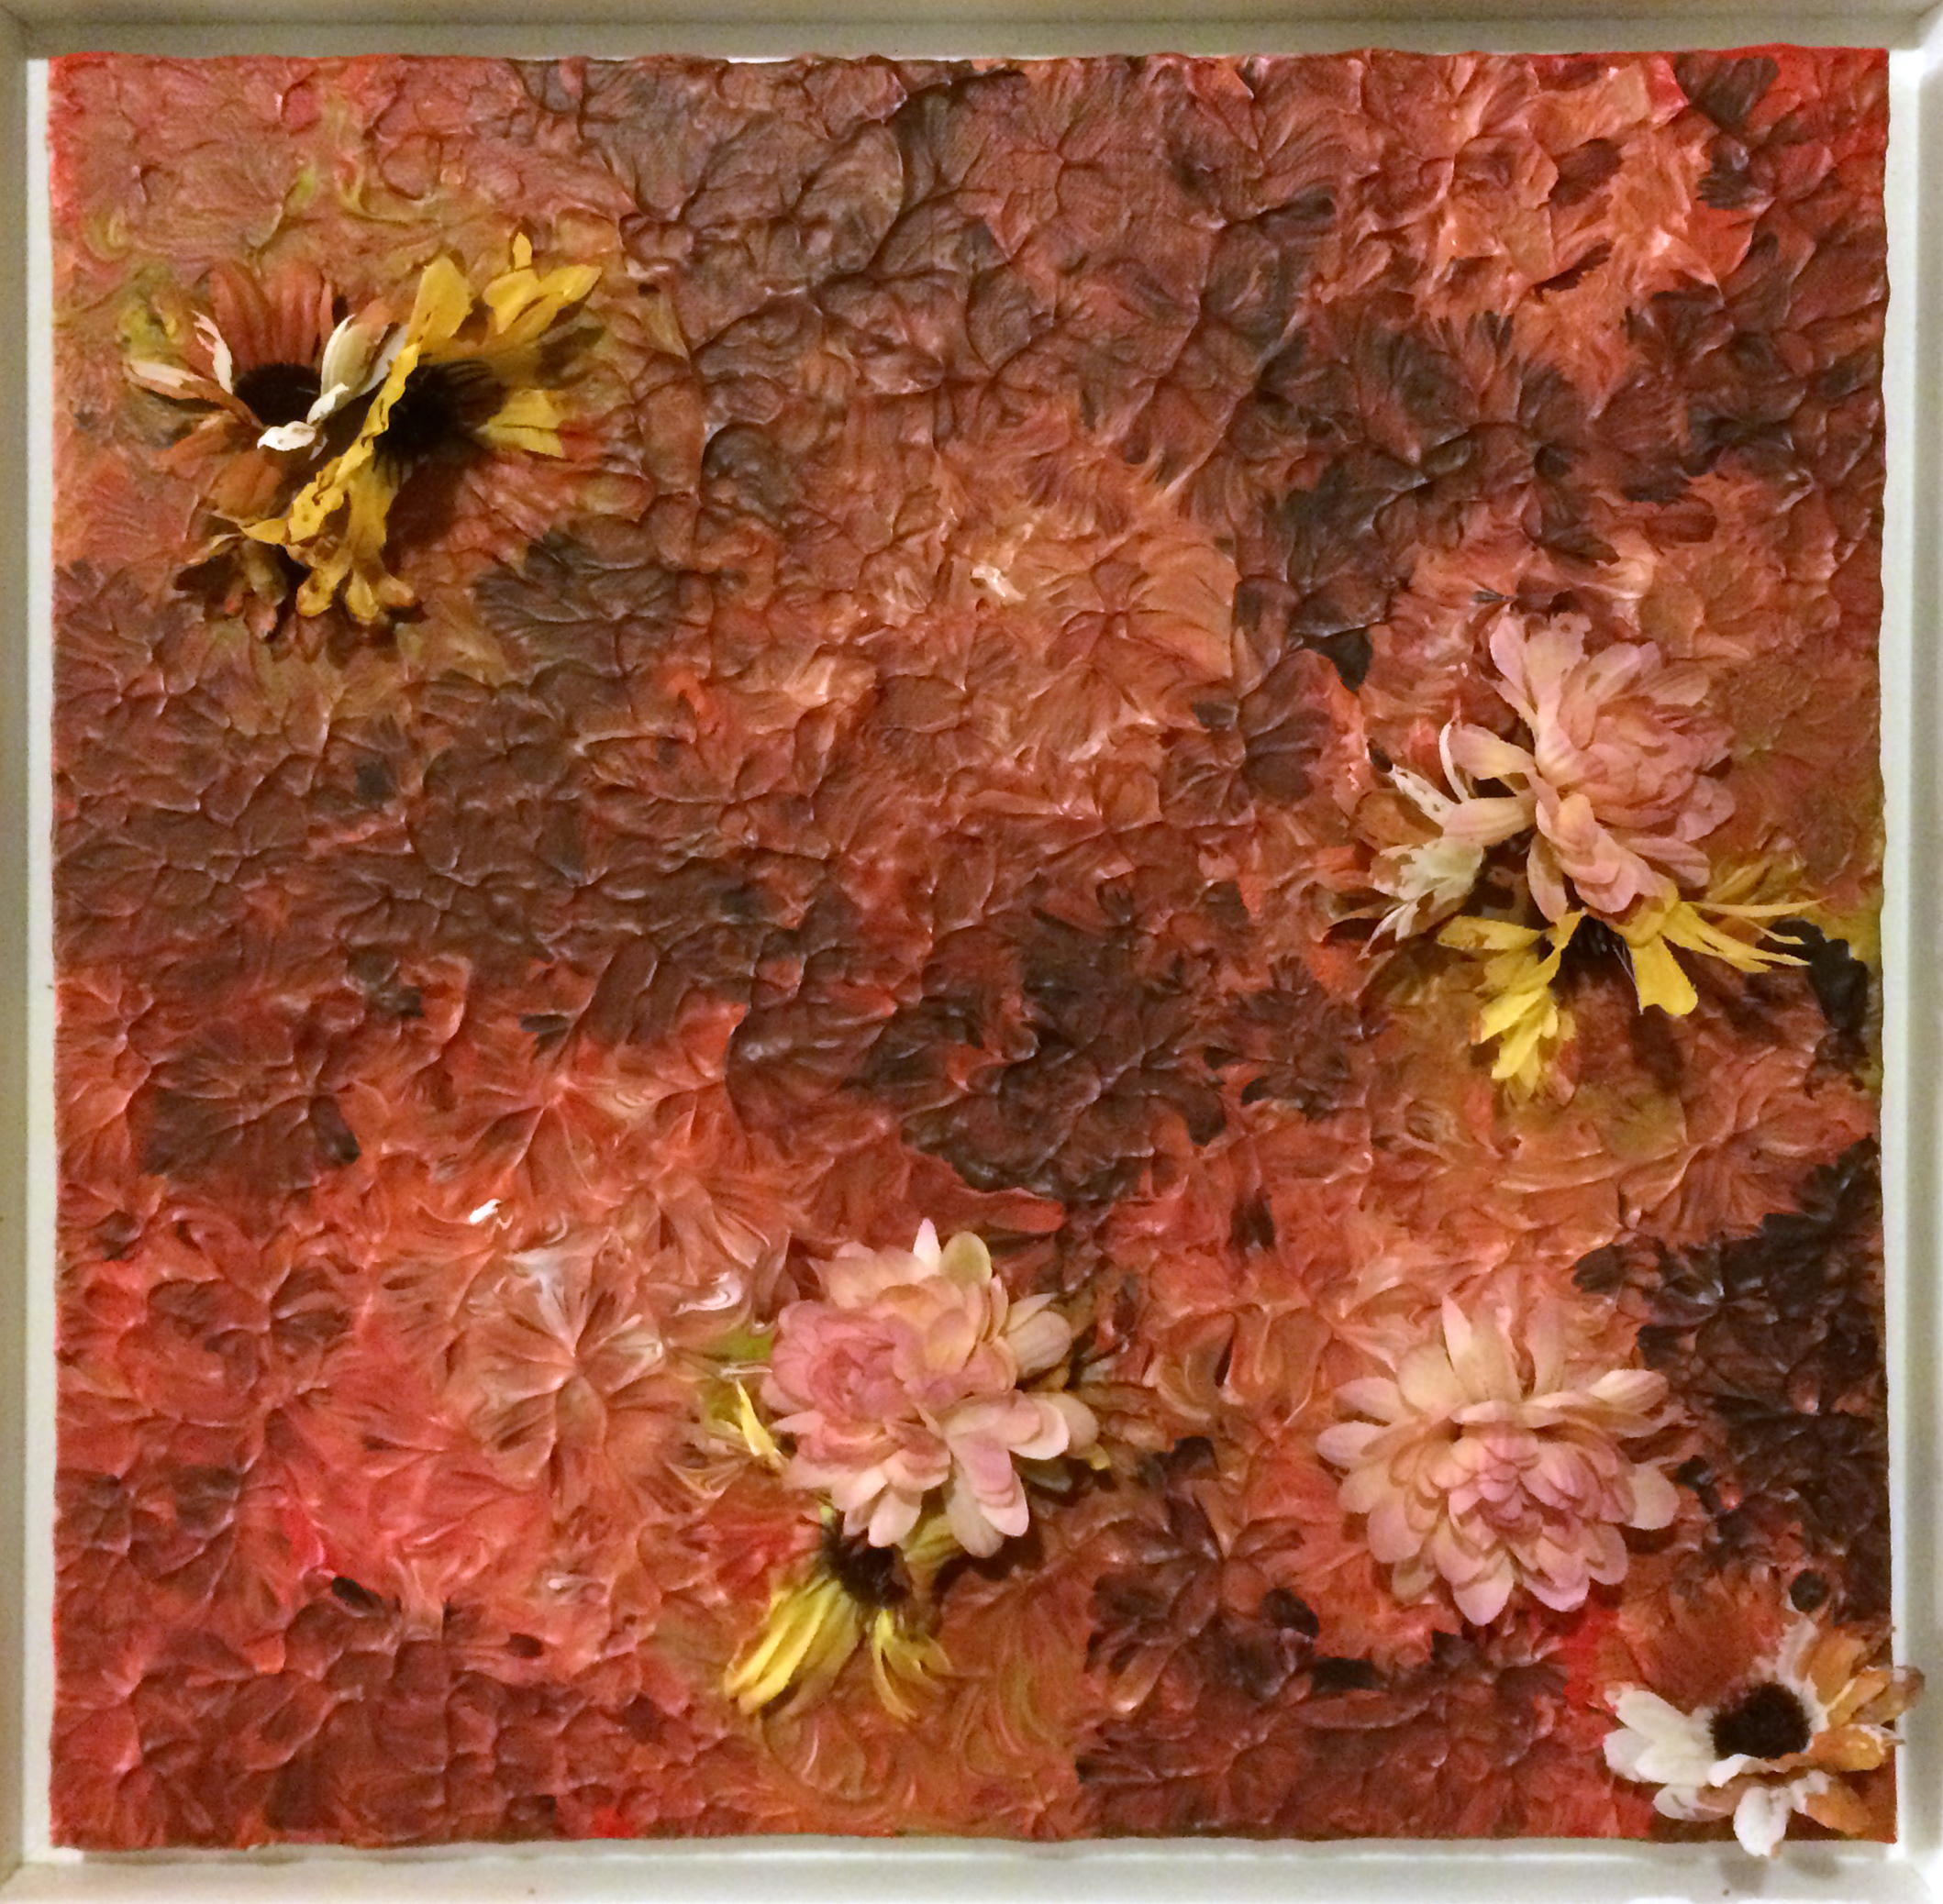 thickly impastoed deep red acrylic with silk flowers stuck down into and partially covered in the paint